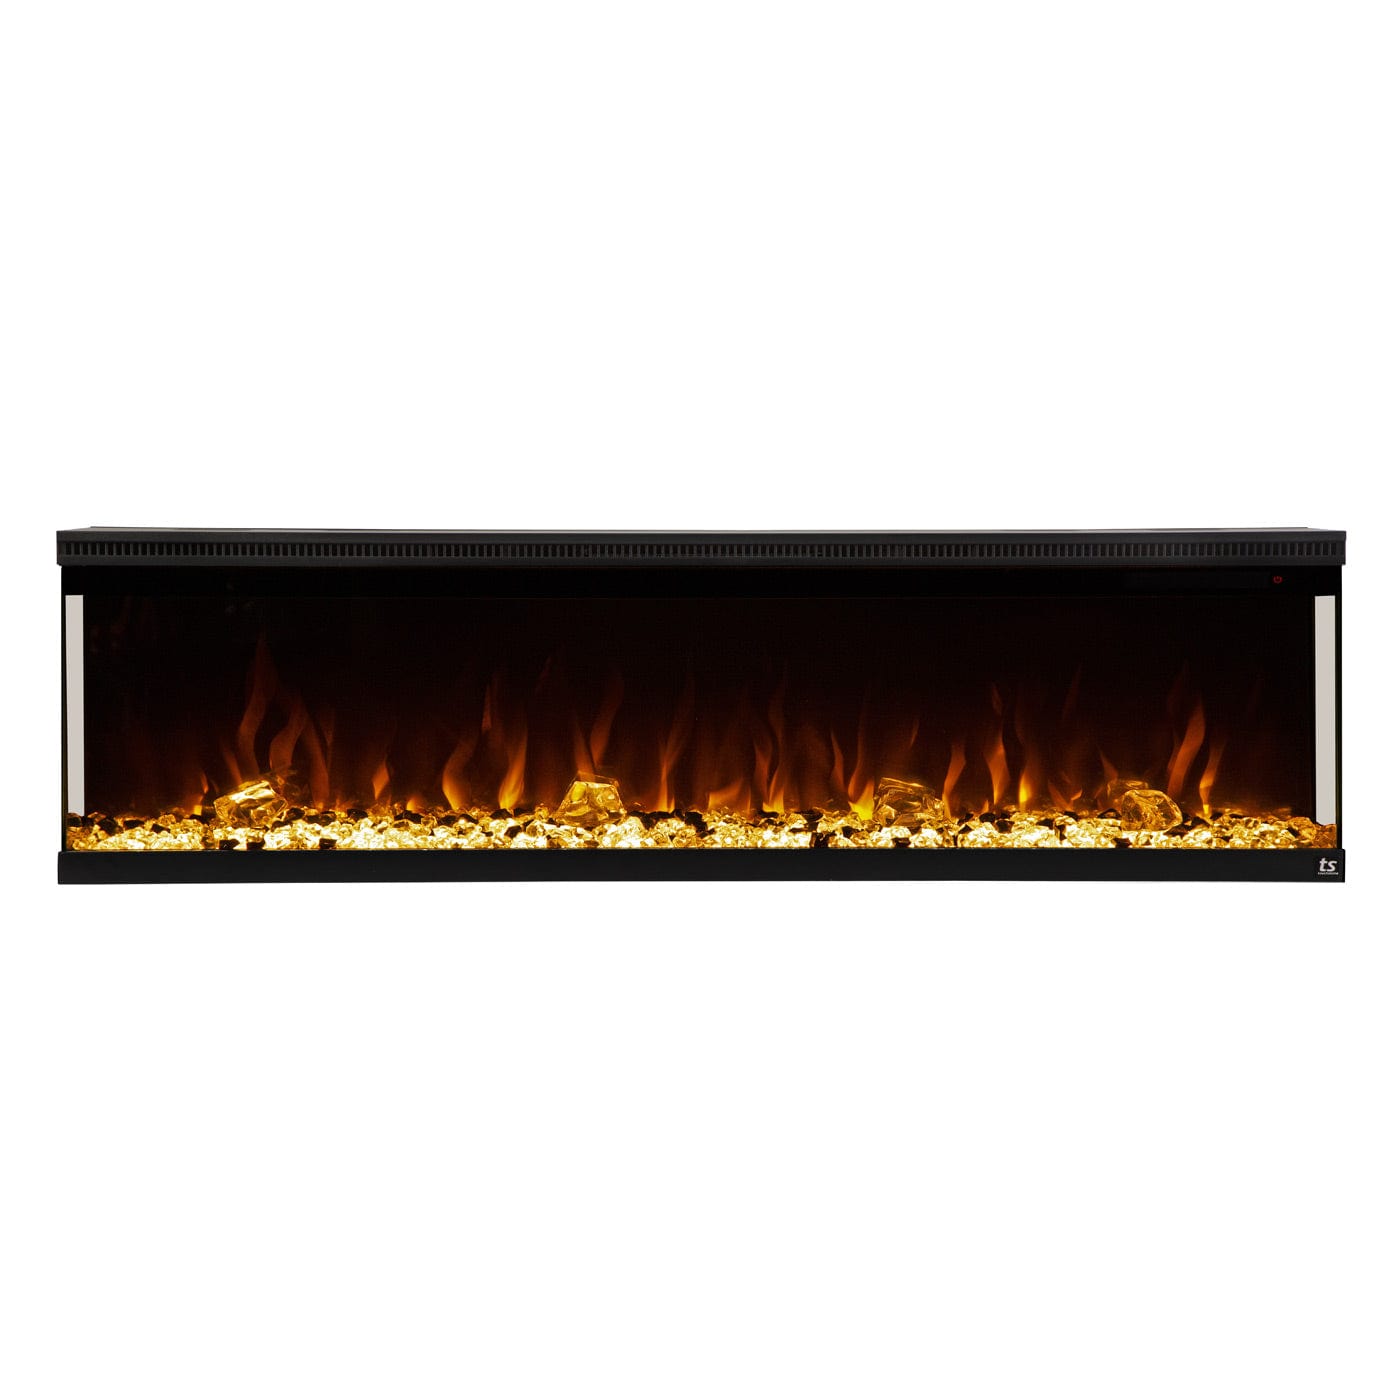 Touchstone Sideline Infinity Electric Fireplace 72 inches smart home technology shown with crystals